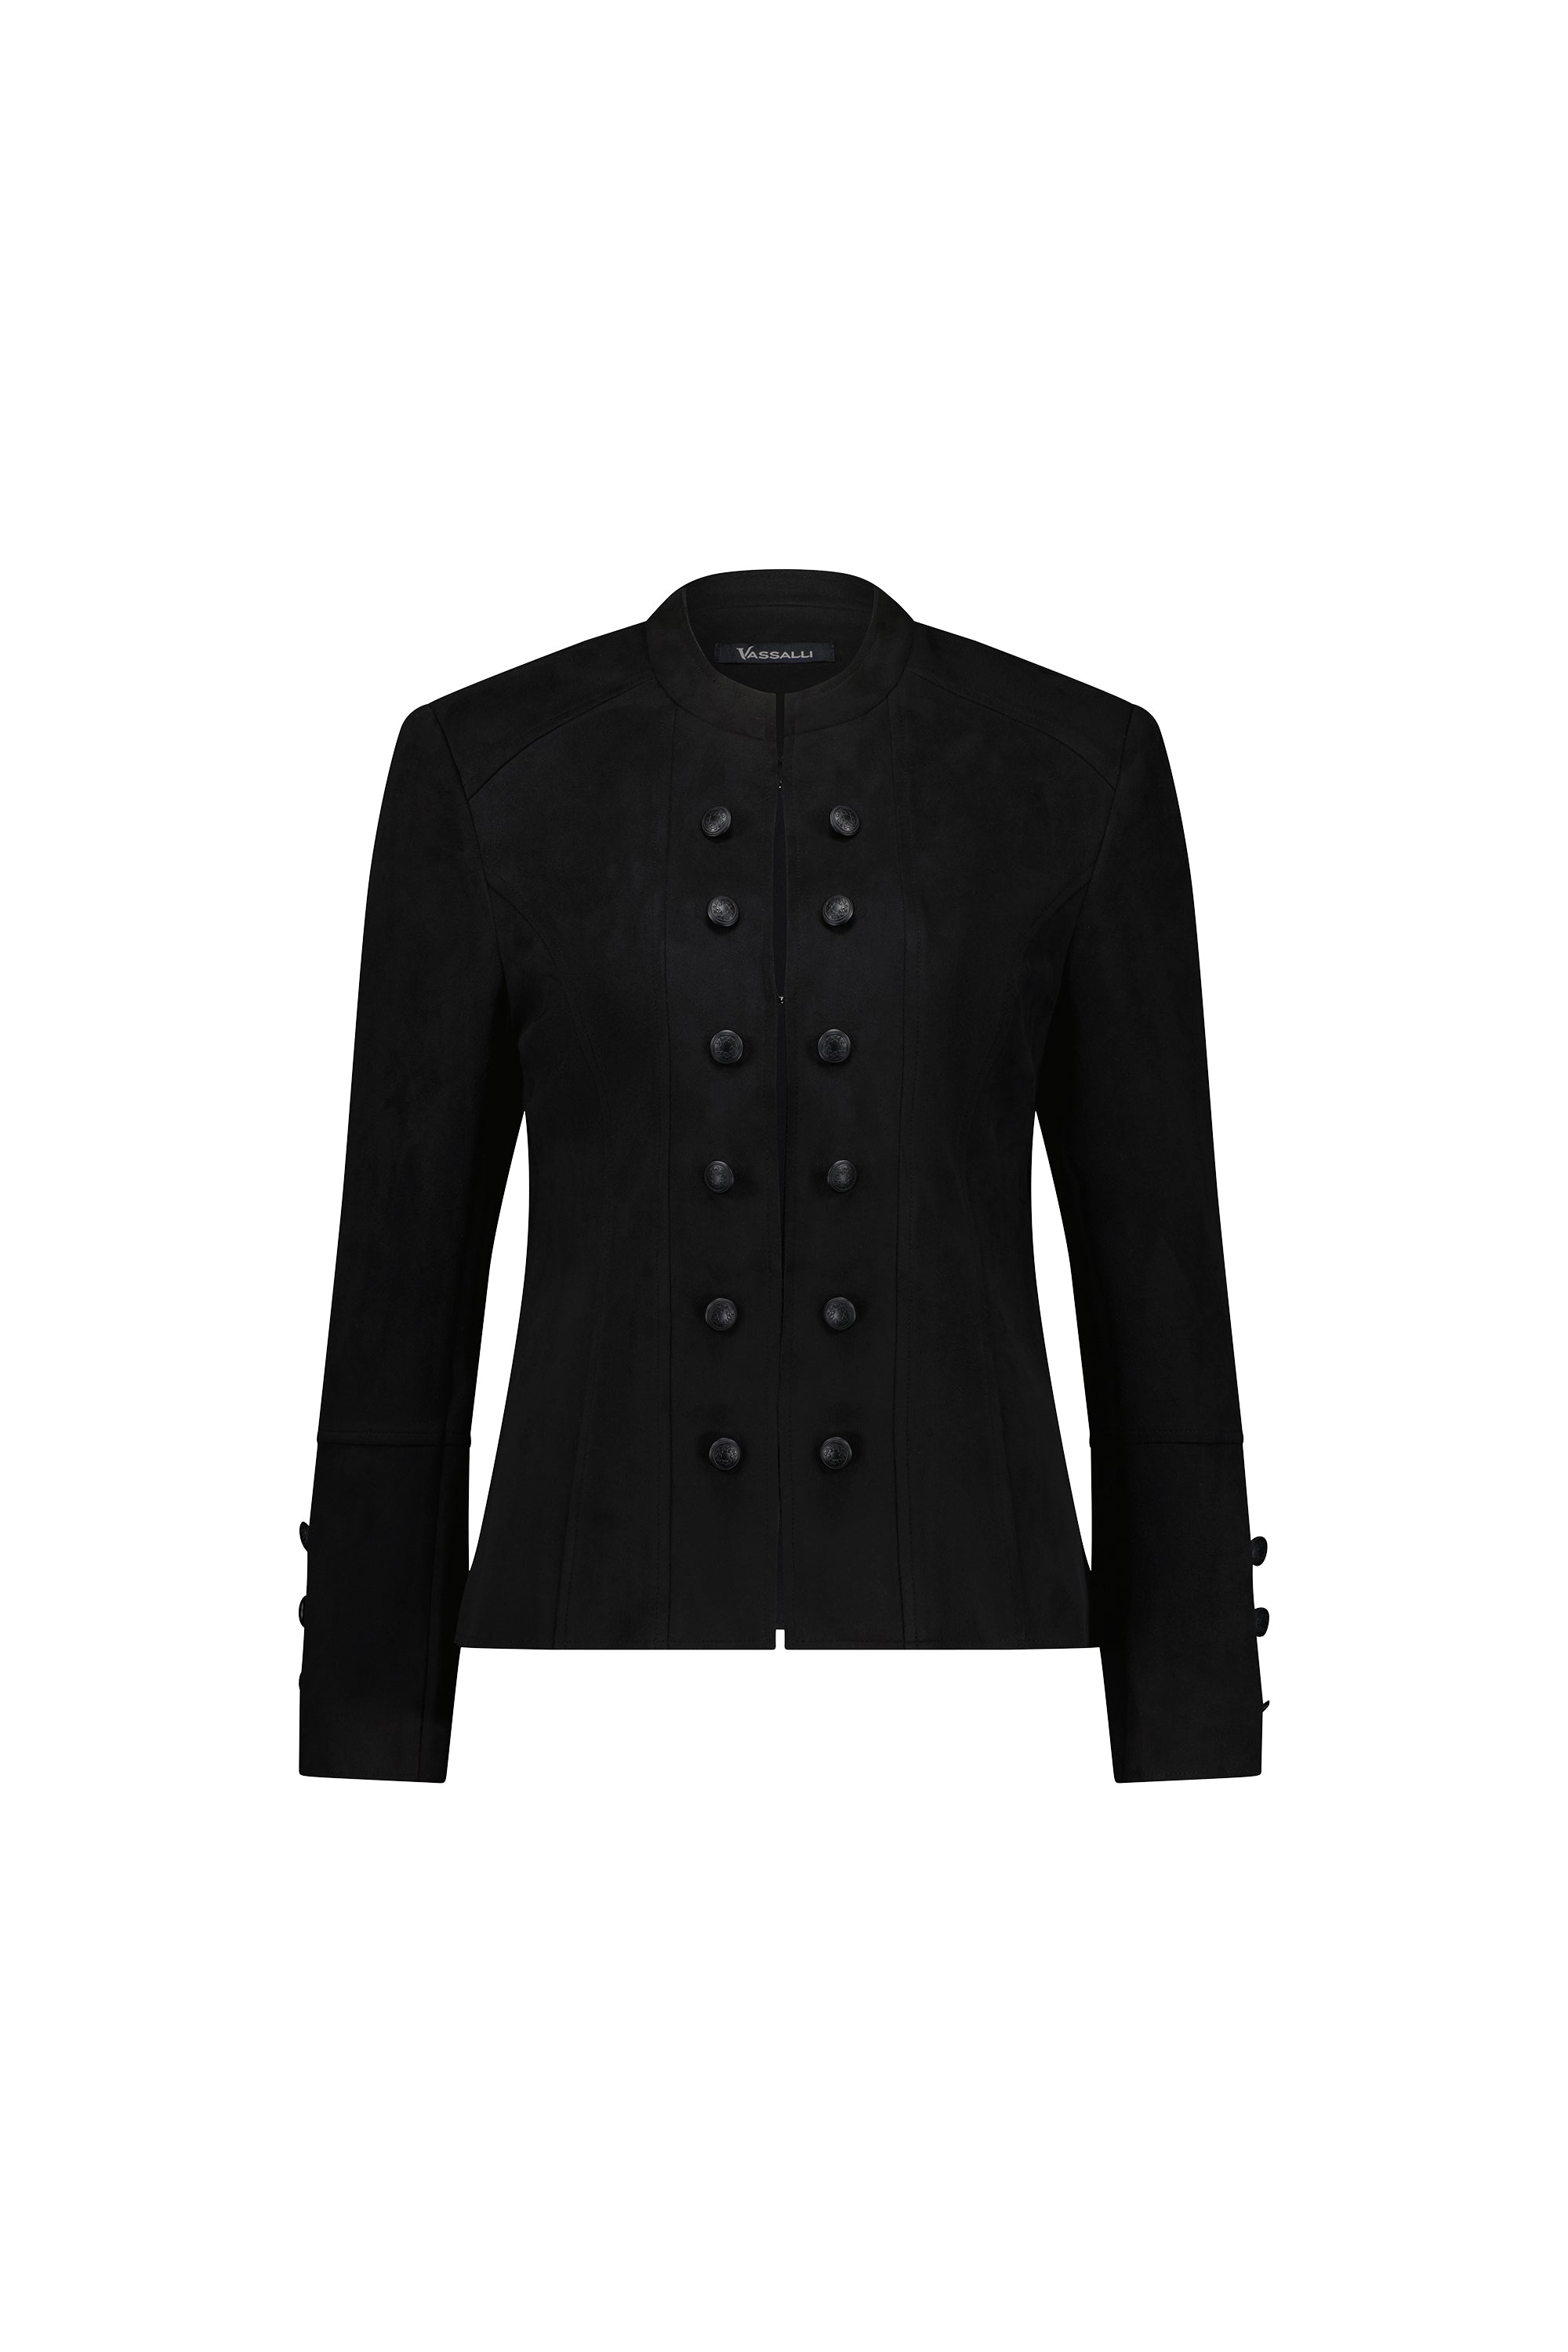 Vassalli Military Style with Button Front Detail - Black